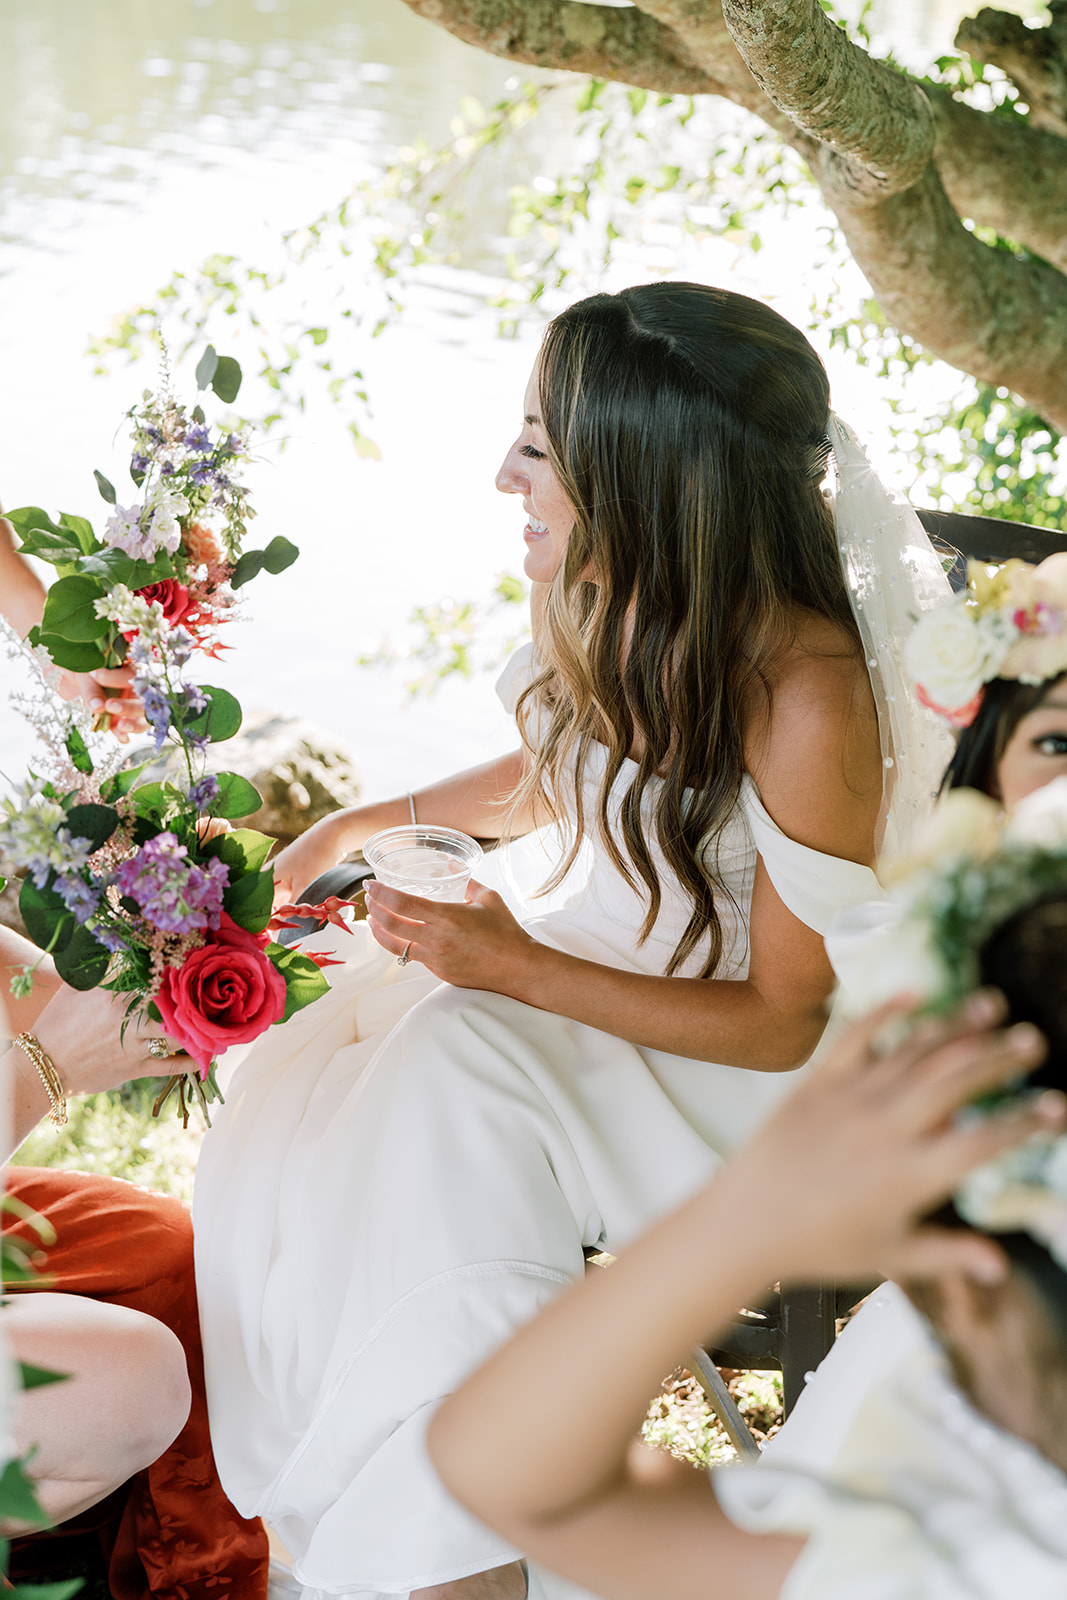 A bride sitting outdoors, laughing and holding a drink, with a colorful bouquet nearby Hawaiian Wedding in Kauai